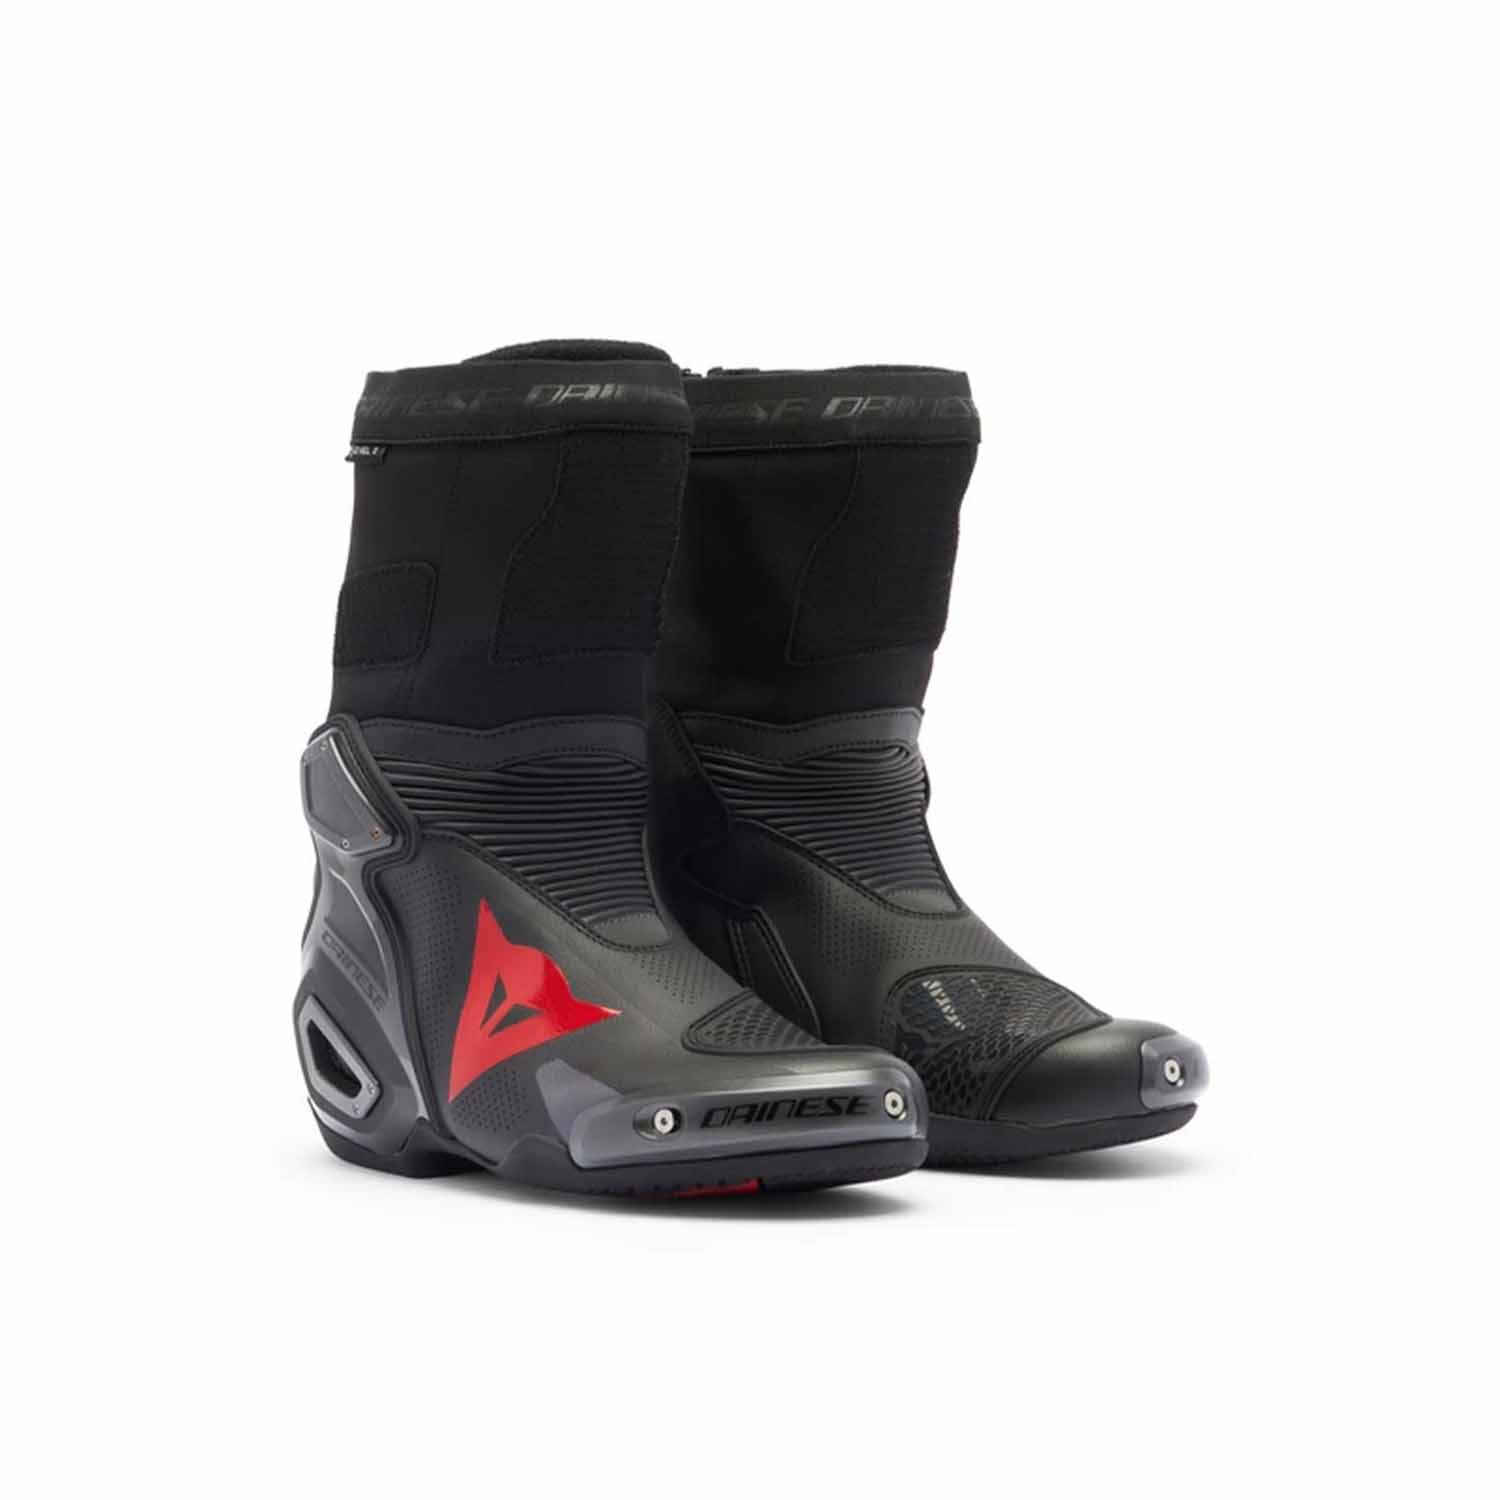 Image of Dainese Axial 2 Air Boots Black Black Red Fluo Talla 41